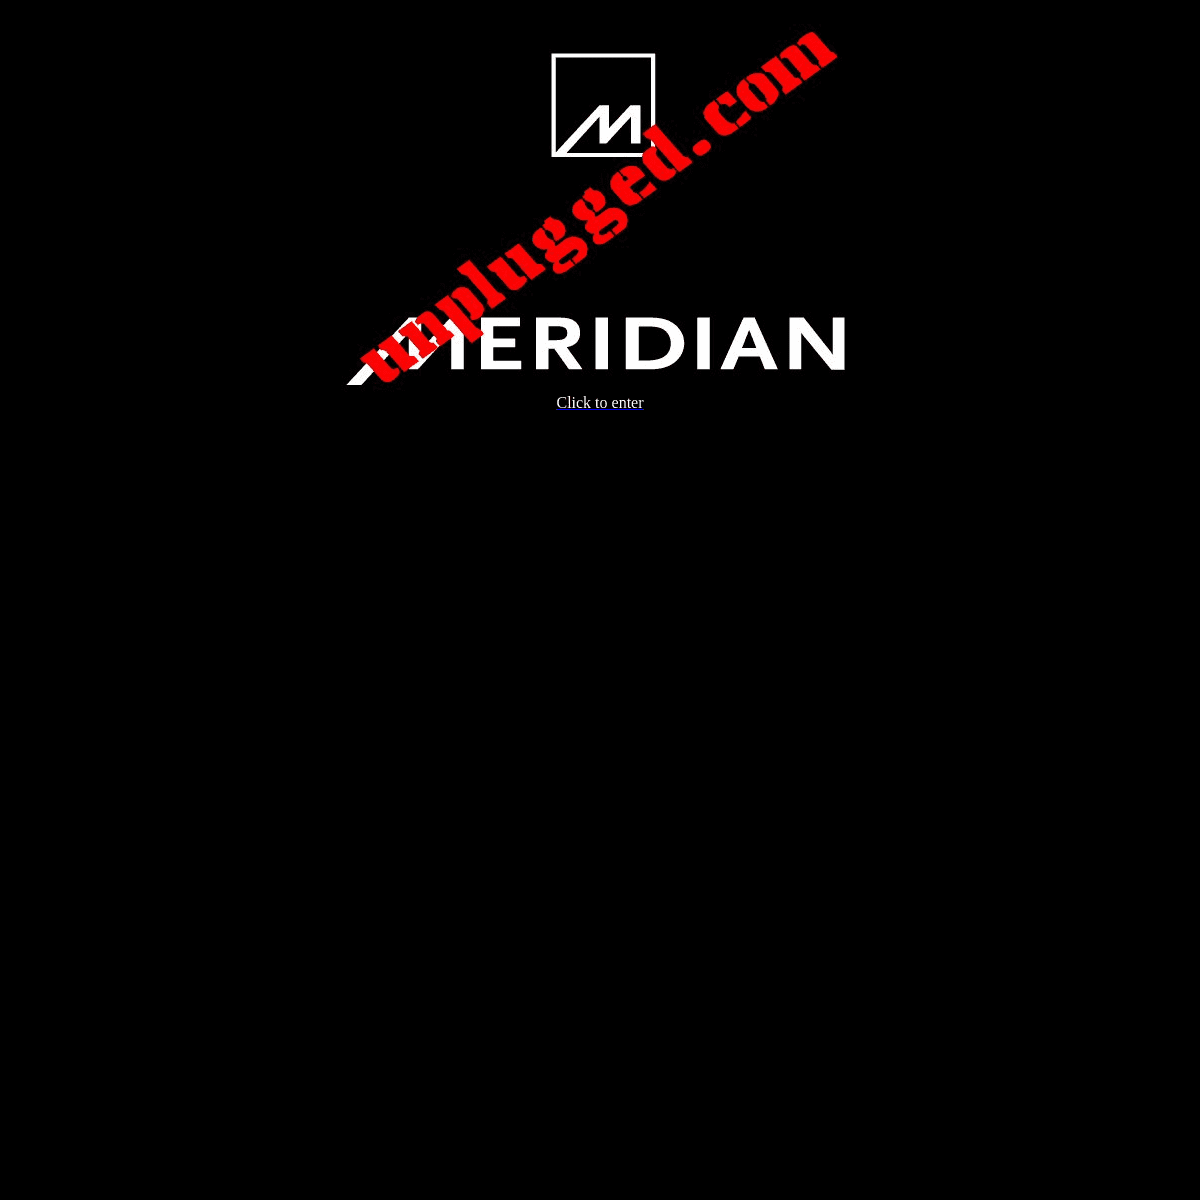 A complete backup of meridianunplugged.com